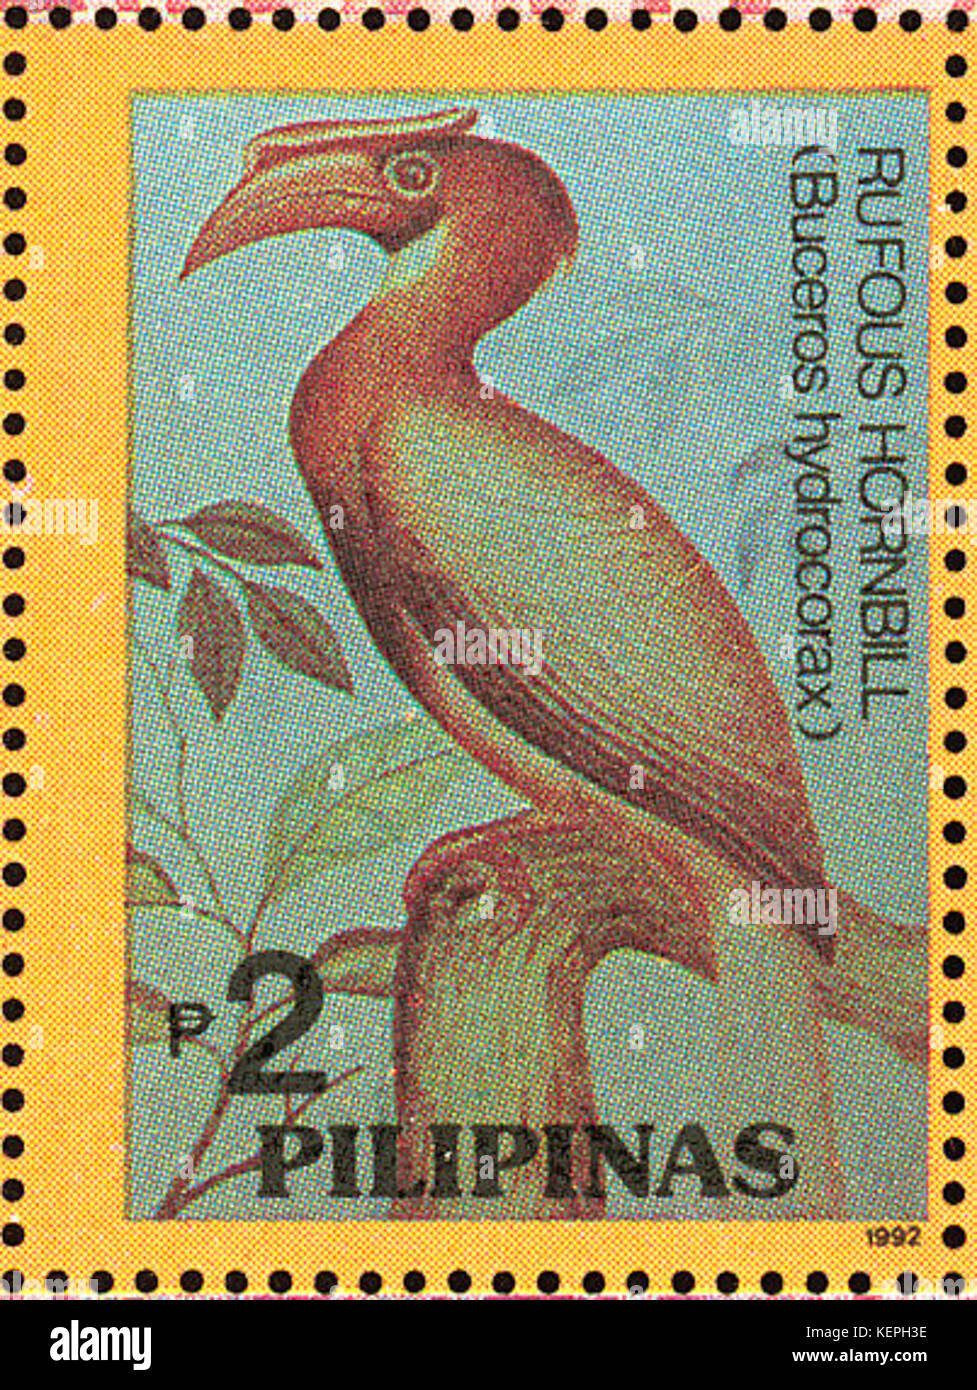 Buceros hydrocorax 1992 stamp of the Philippines Stock Photo